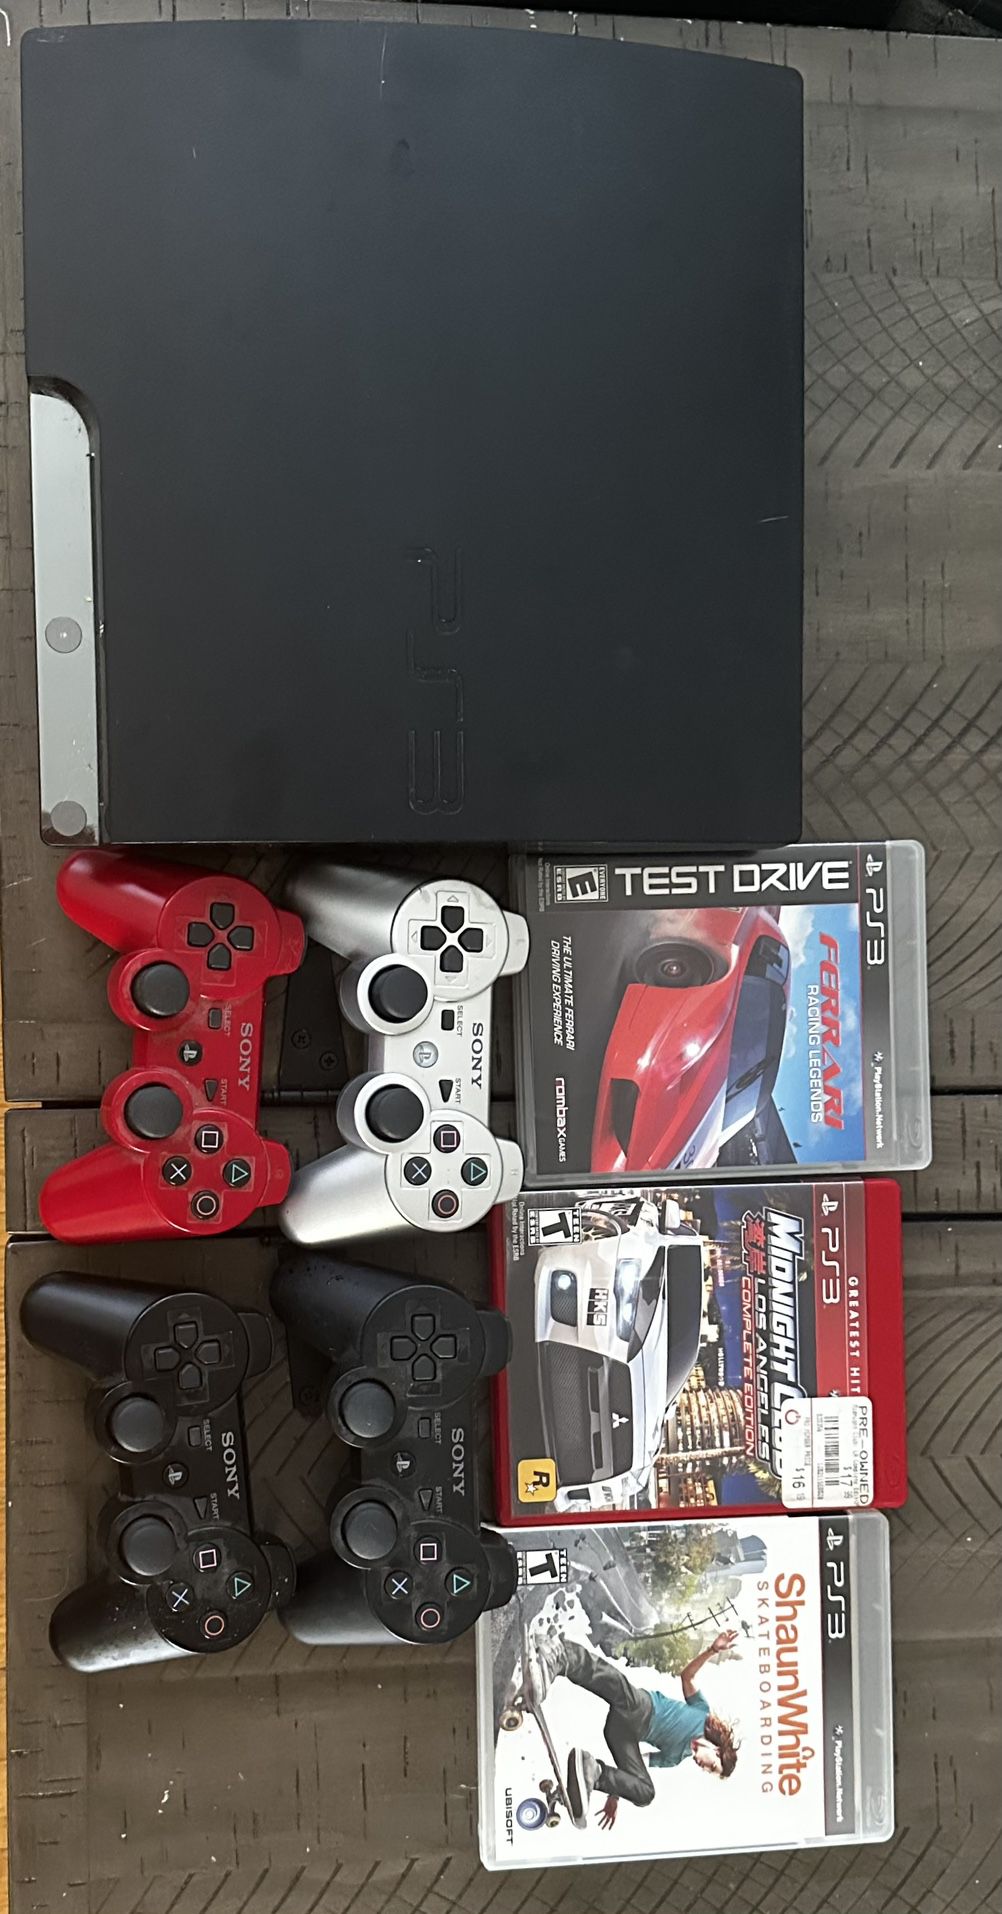 PS3 W/ 4 controllers and 3 Games